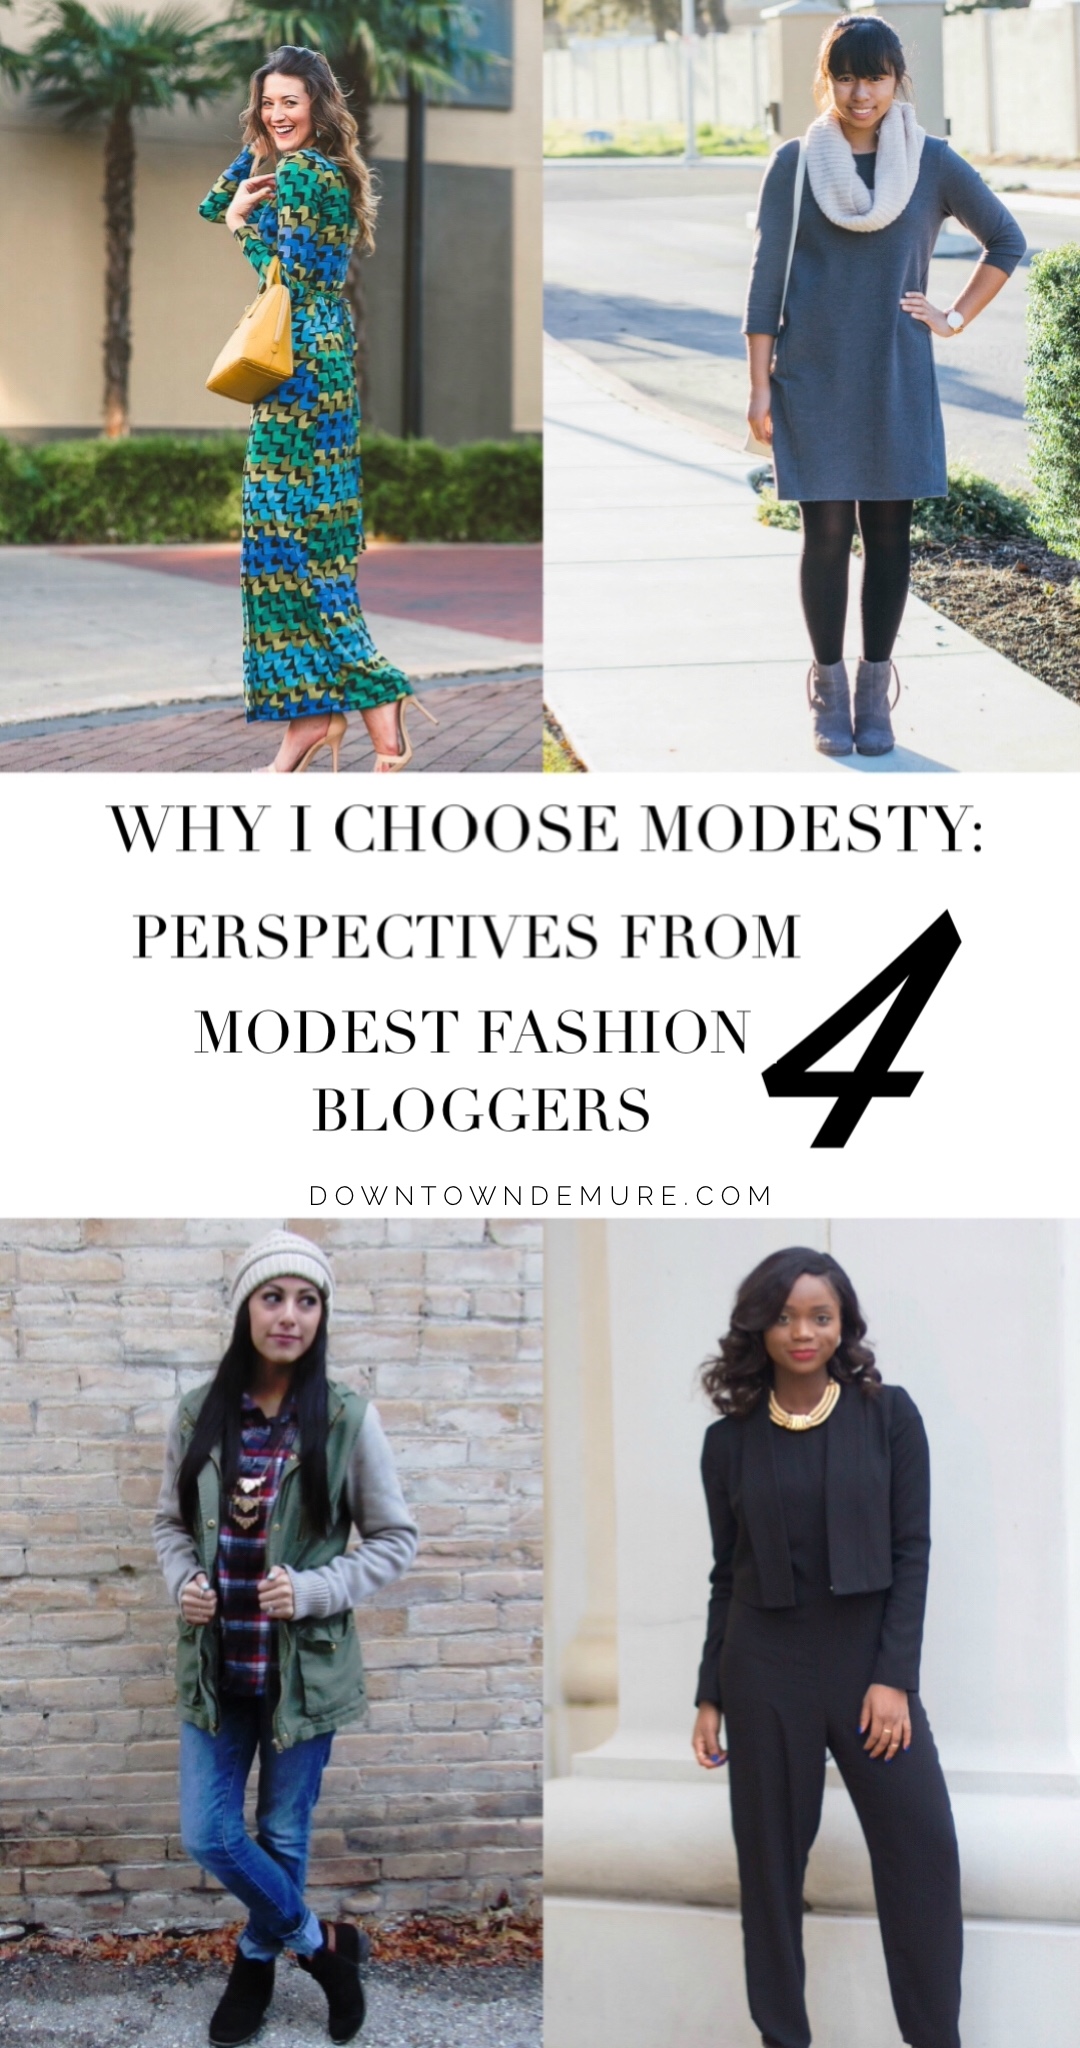 Thoughts on modesty from 4 modest fashion bloggers - Downtown Demure